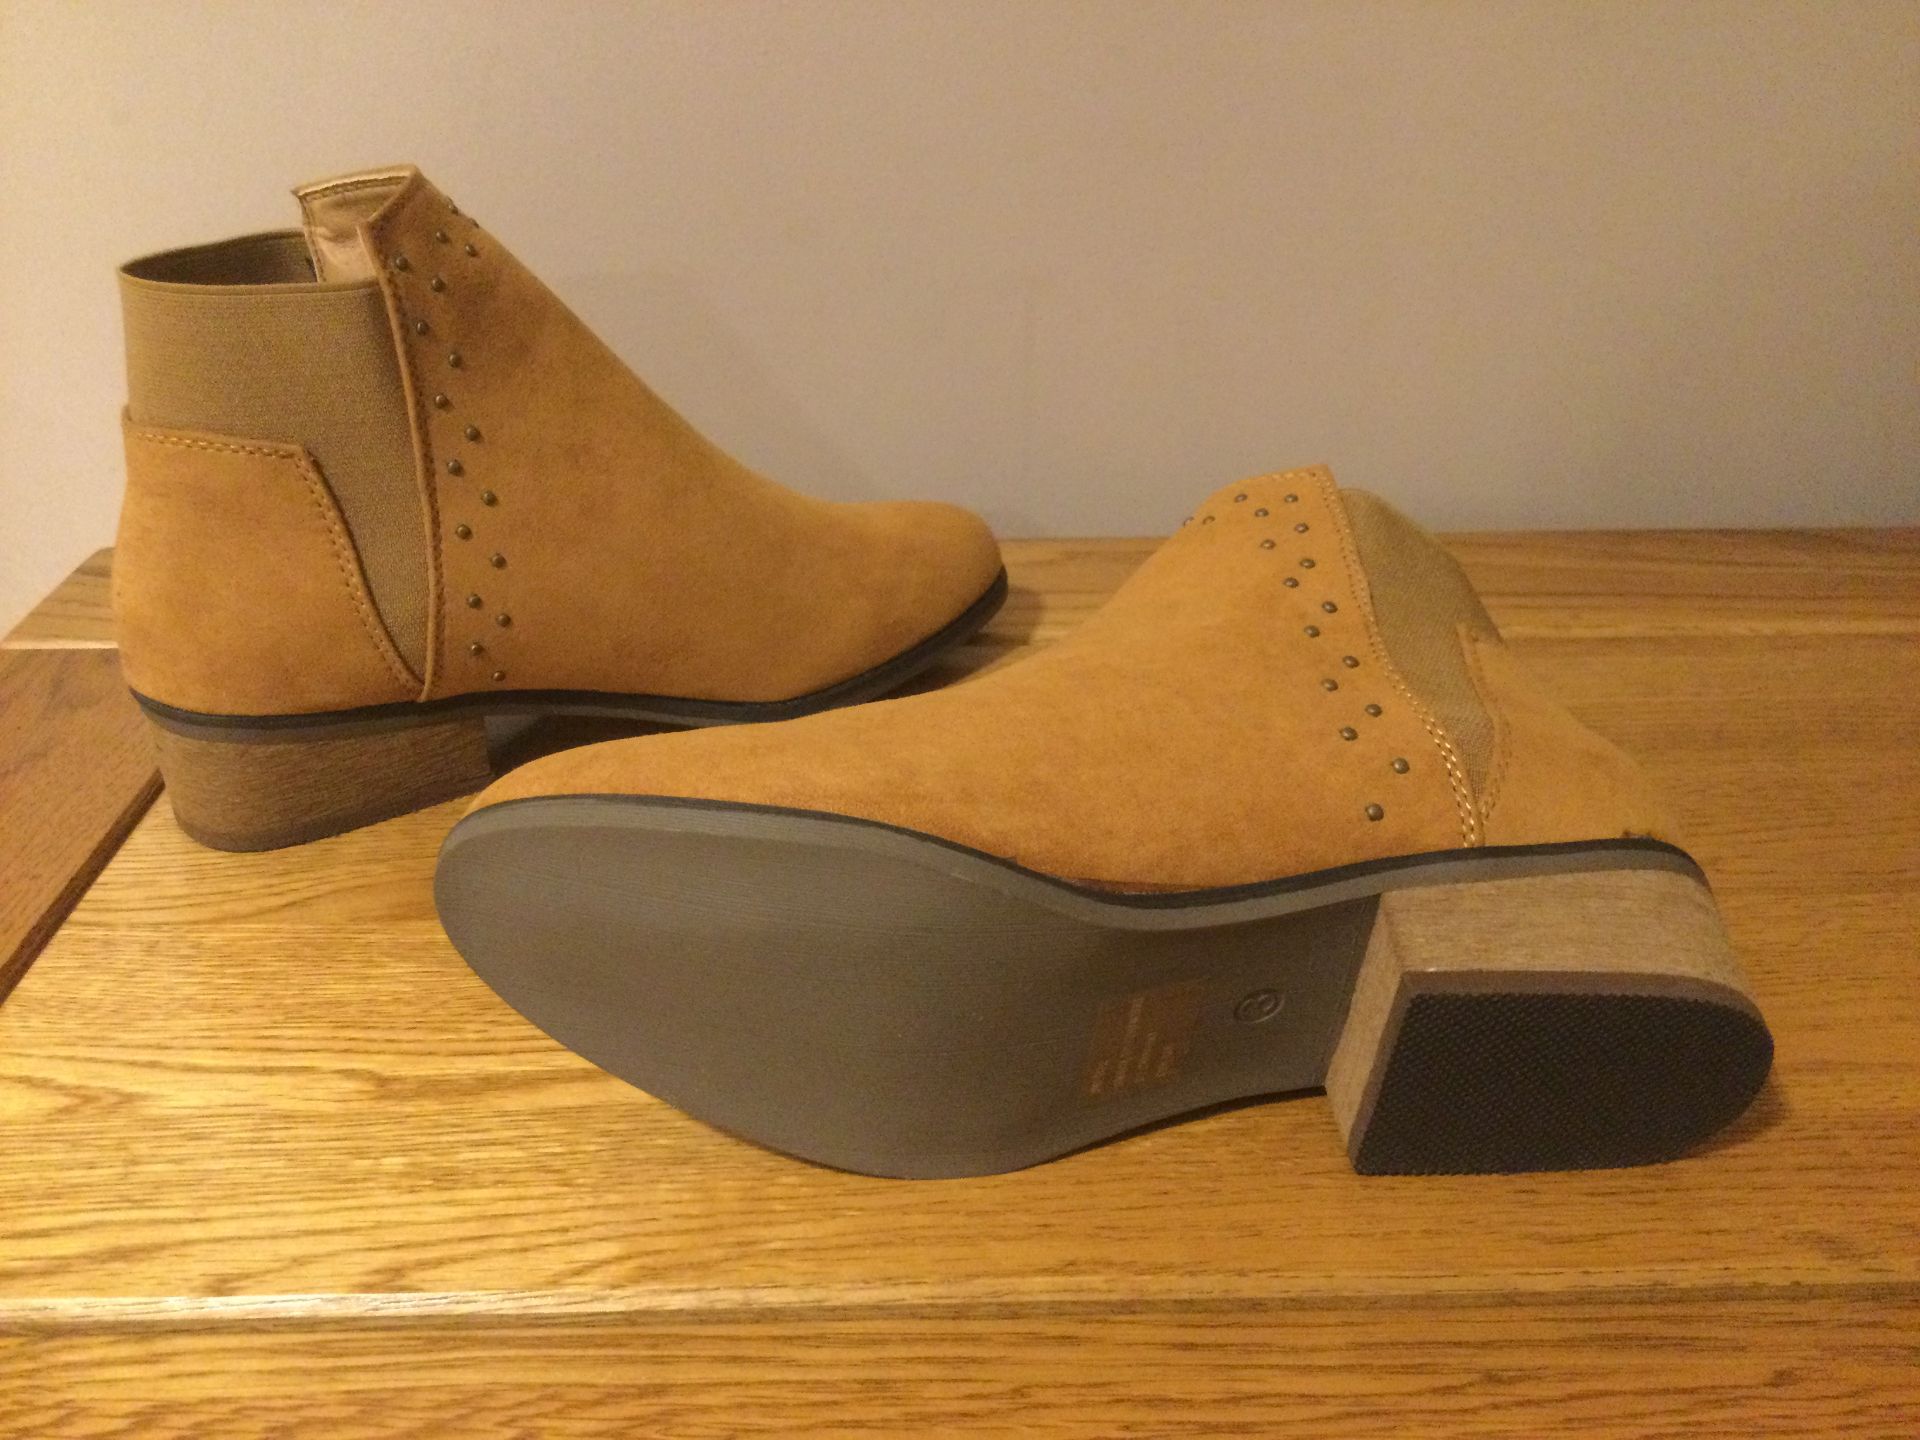 Dolcis “Wendy” Low Heel Ankle Boots, Size 6, Tan - New RRP £45.99 - Image 5 of 7